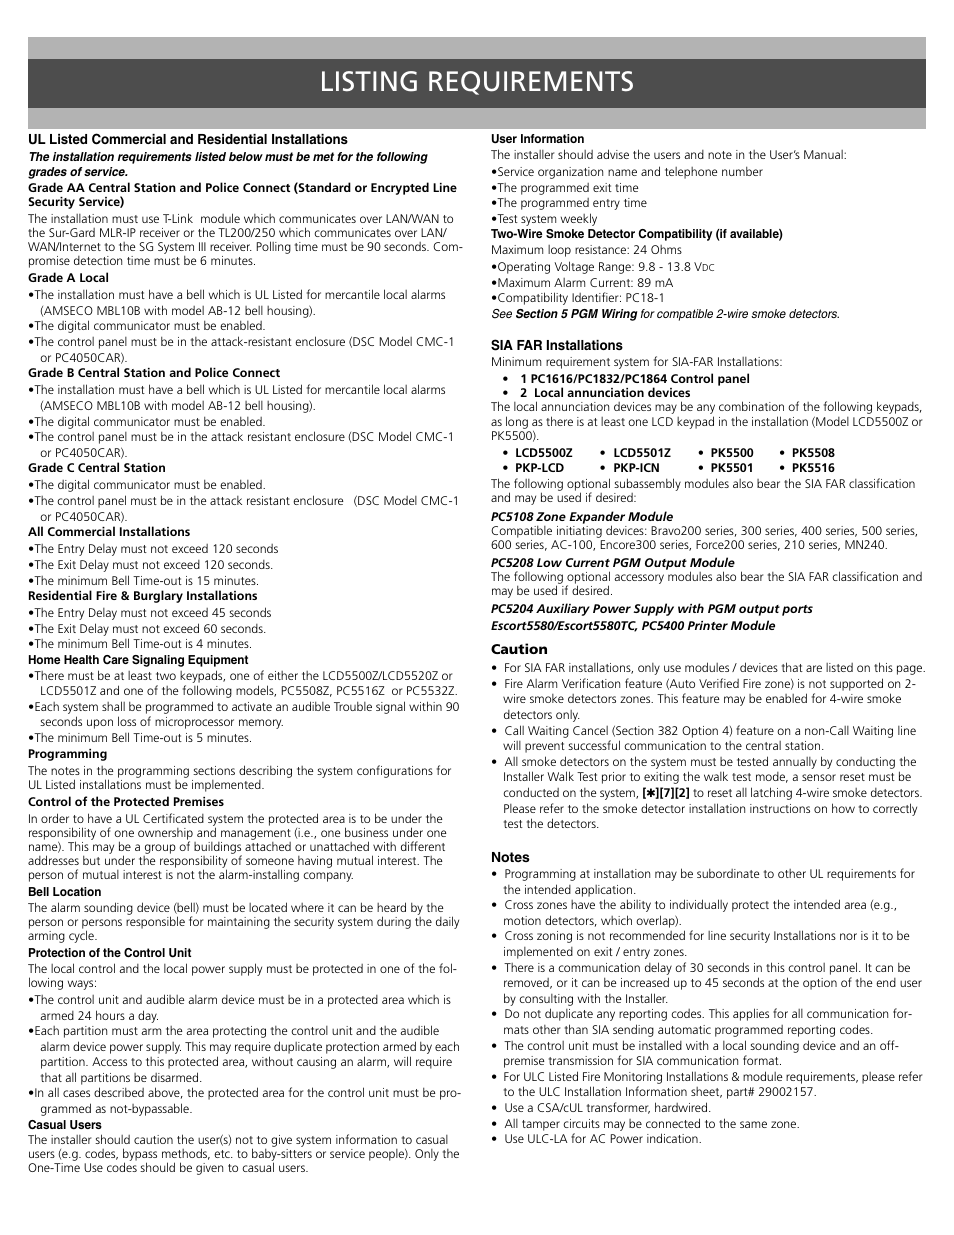 Listing requirements | DSC POWERSERIES PC1616 User Manual | Page 13 / 16